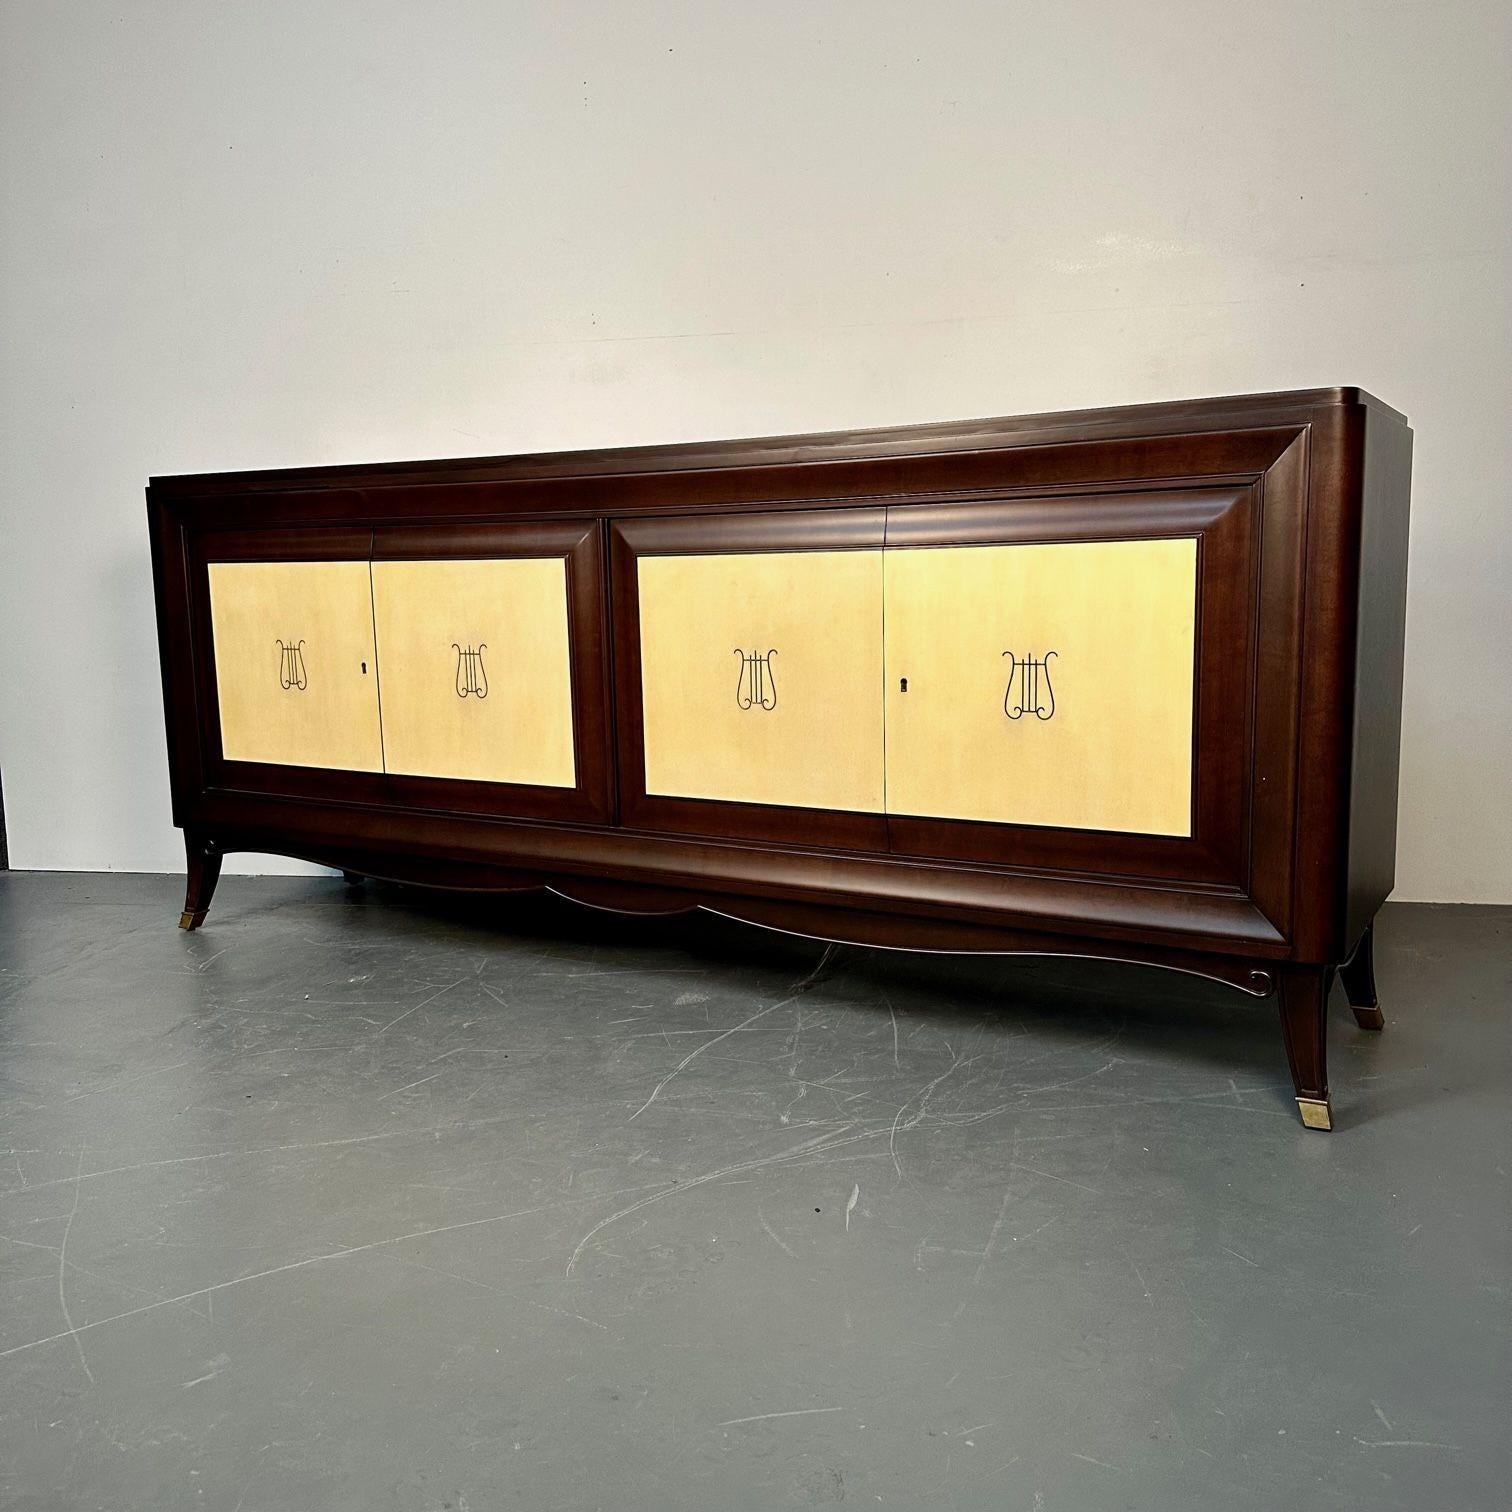 Italian Midcentury Sideboard / Credenza / Cabinet, Parchment, Mahogany, 1950s For Sale 2